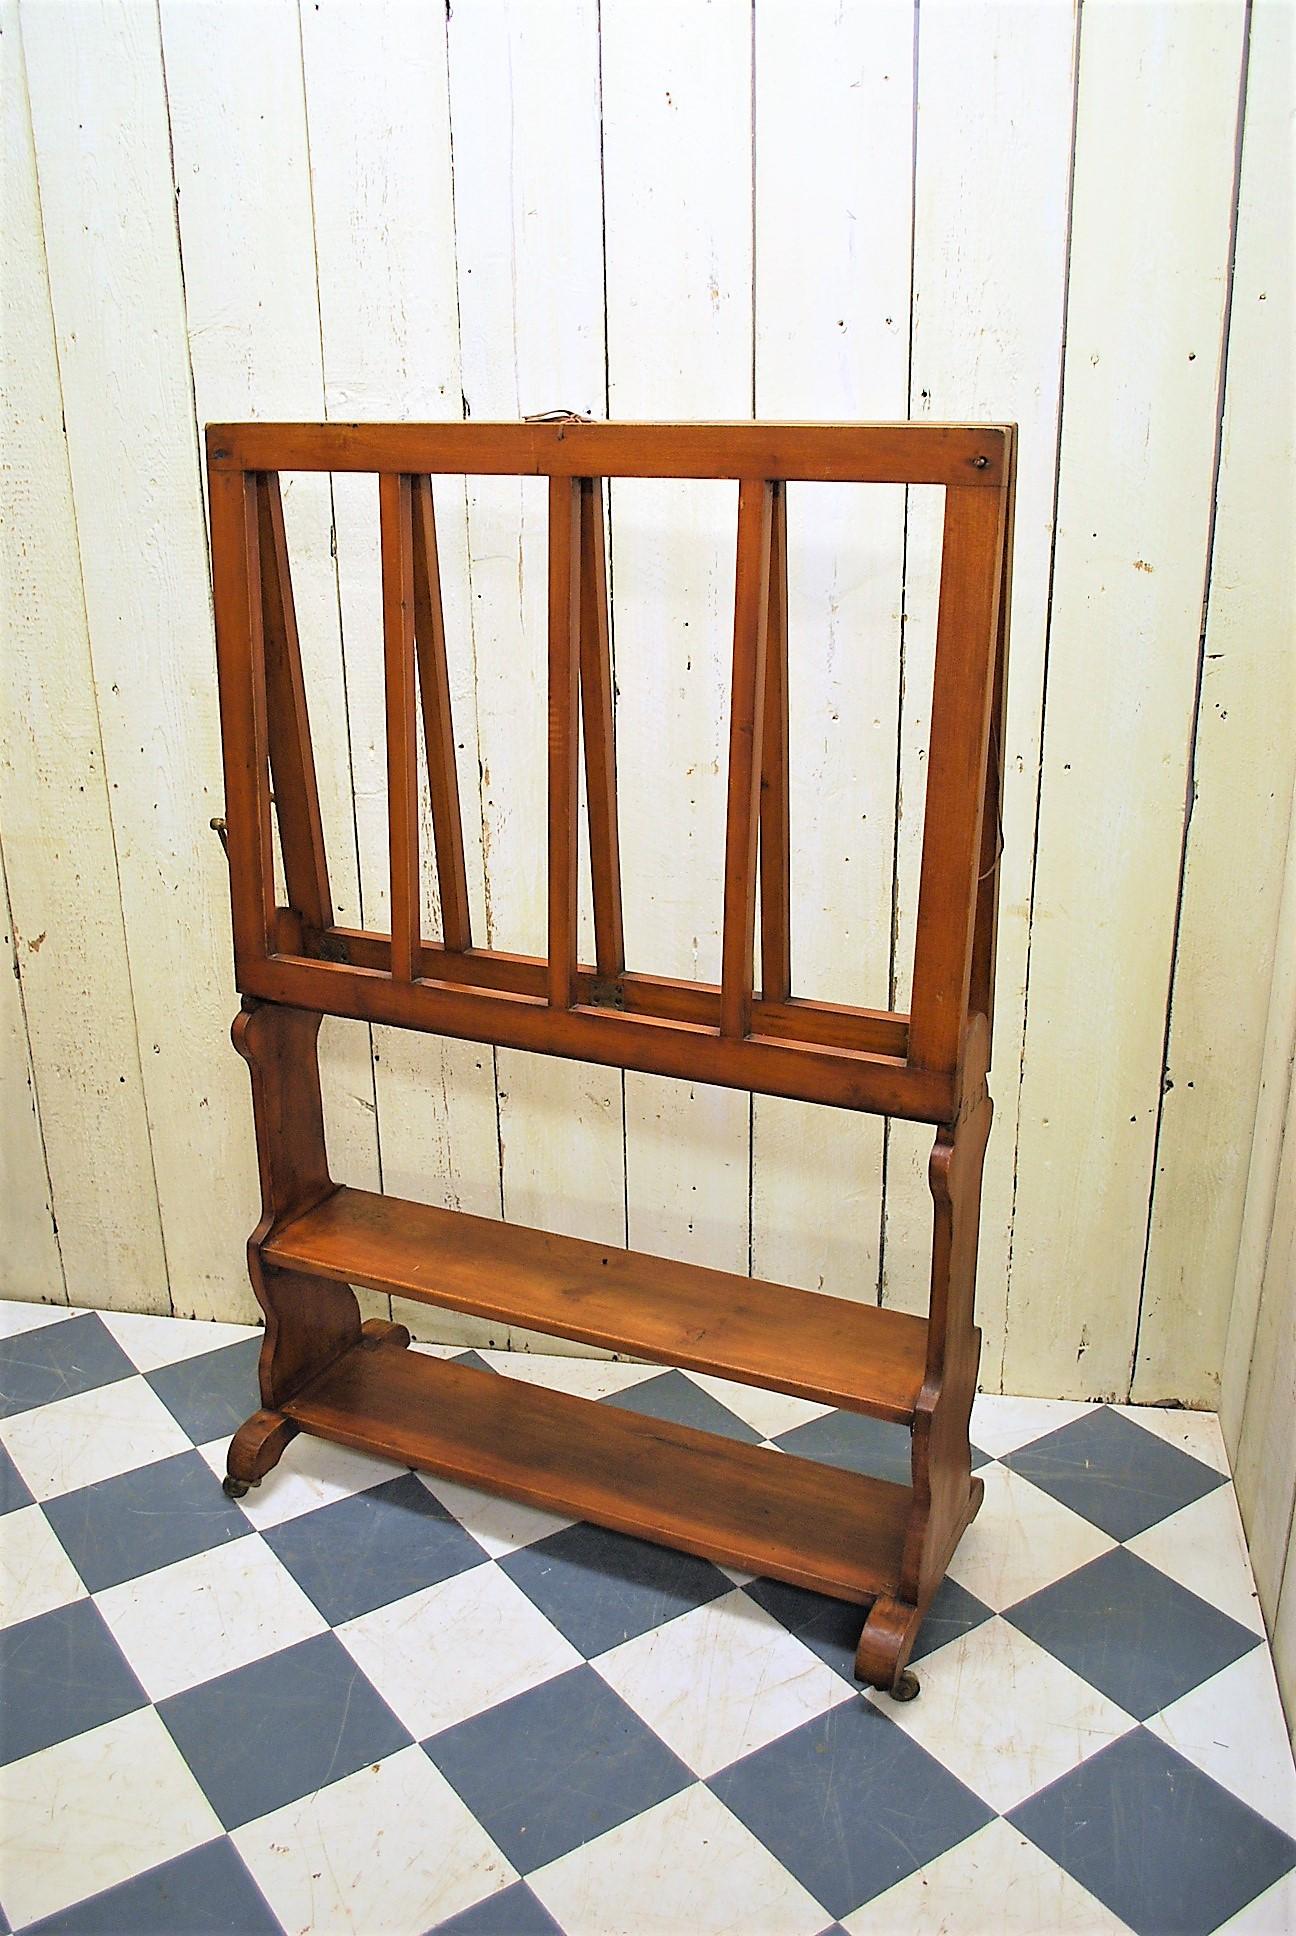 This is a rare French portfolio stand for in a gallery or artists studio. Made in Plain wood and in good undamaged condition with a nice colour and patination. The stand is either tied together closed or opens out for displaying artwork in. Often